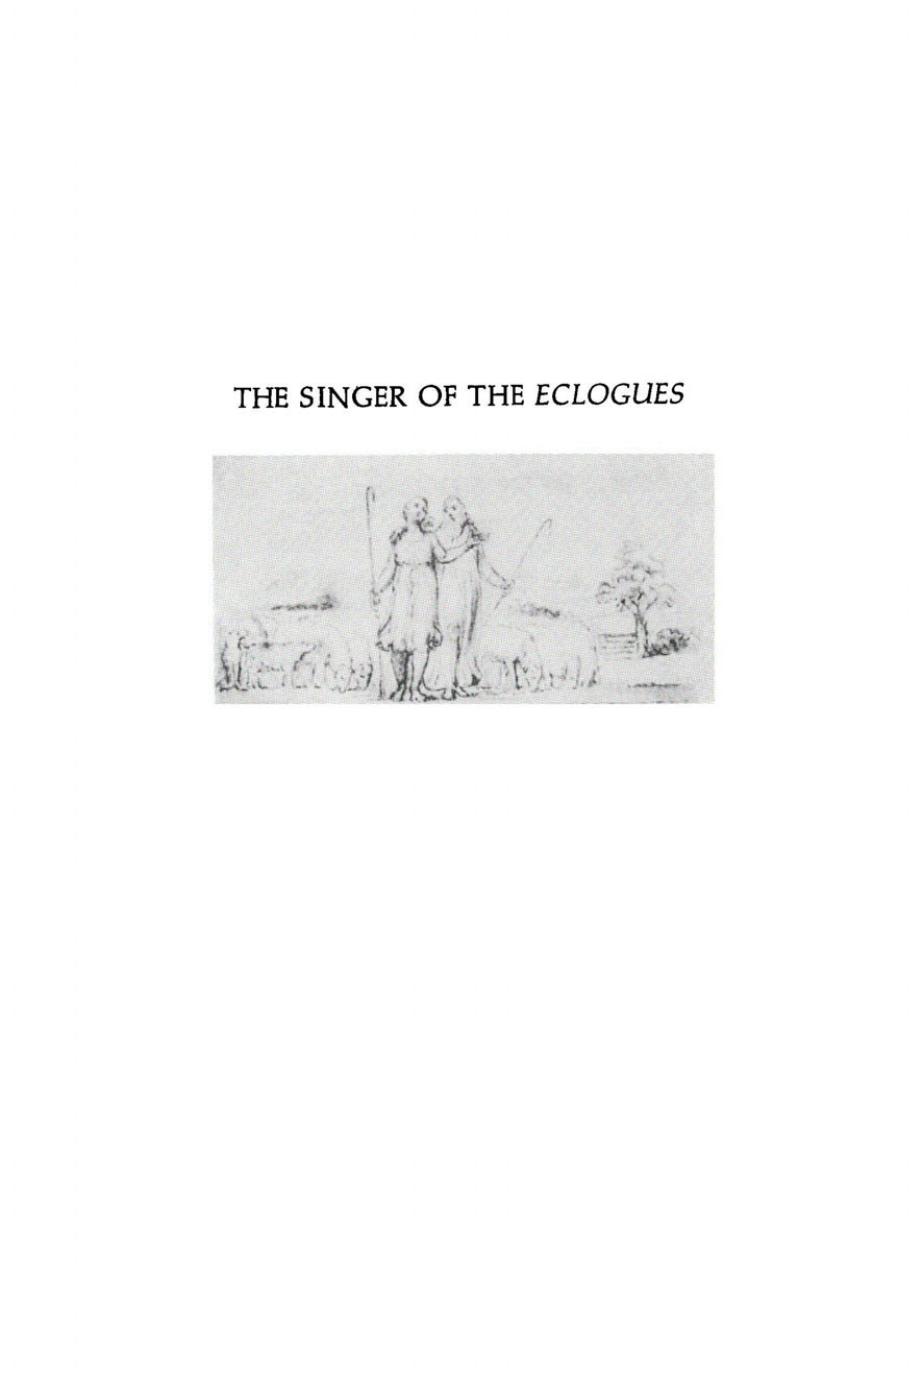 The Singer of the Eclogues by Paul Alpers